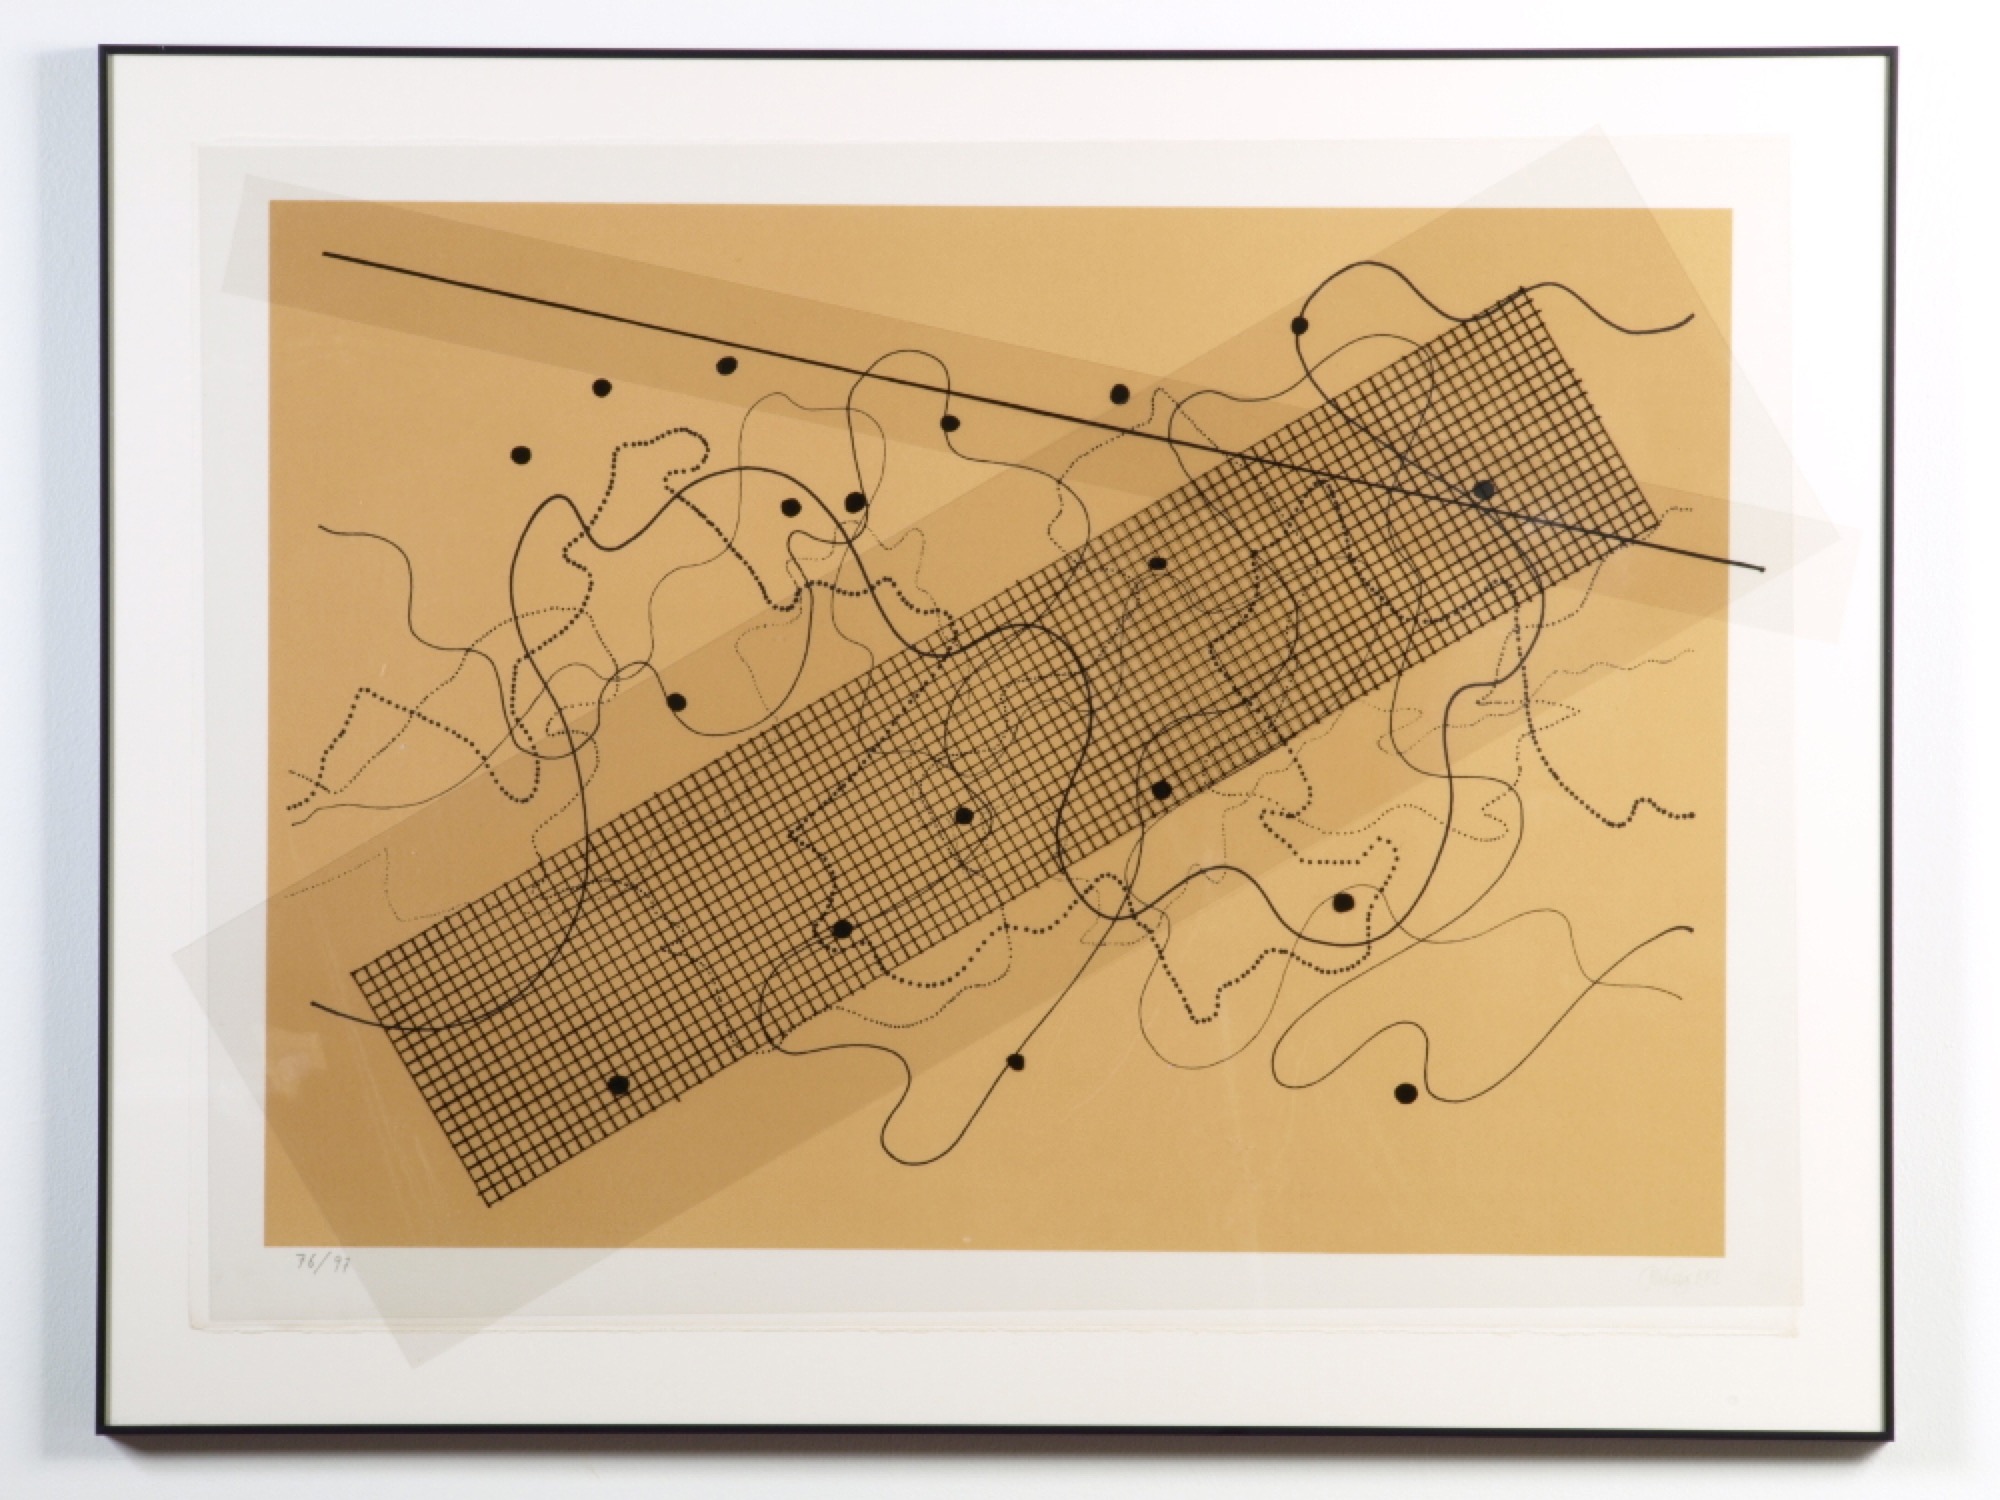 John Cage, <em>Fontana Mix (Orange/Tan)</em>, 1981, Screenprint on Arches paper, with three celluloid (mylar) templates printed in black ink. Courtesy of the artist and Carl Solway Gallery, Cincinnati.